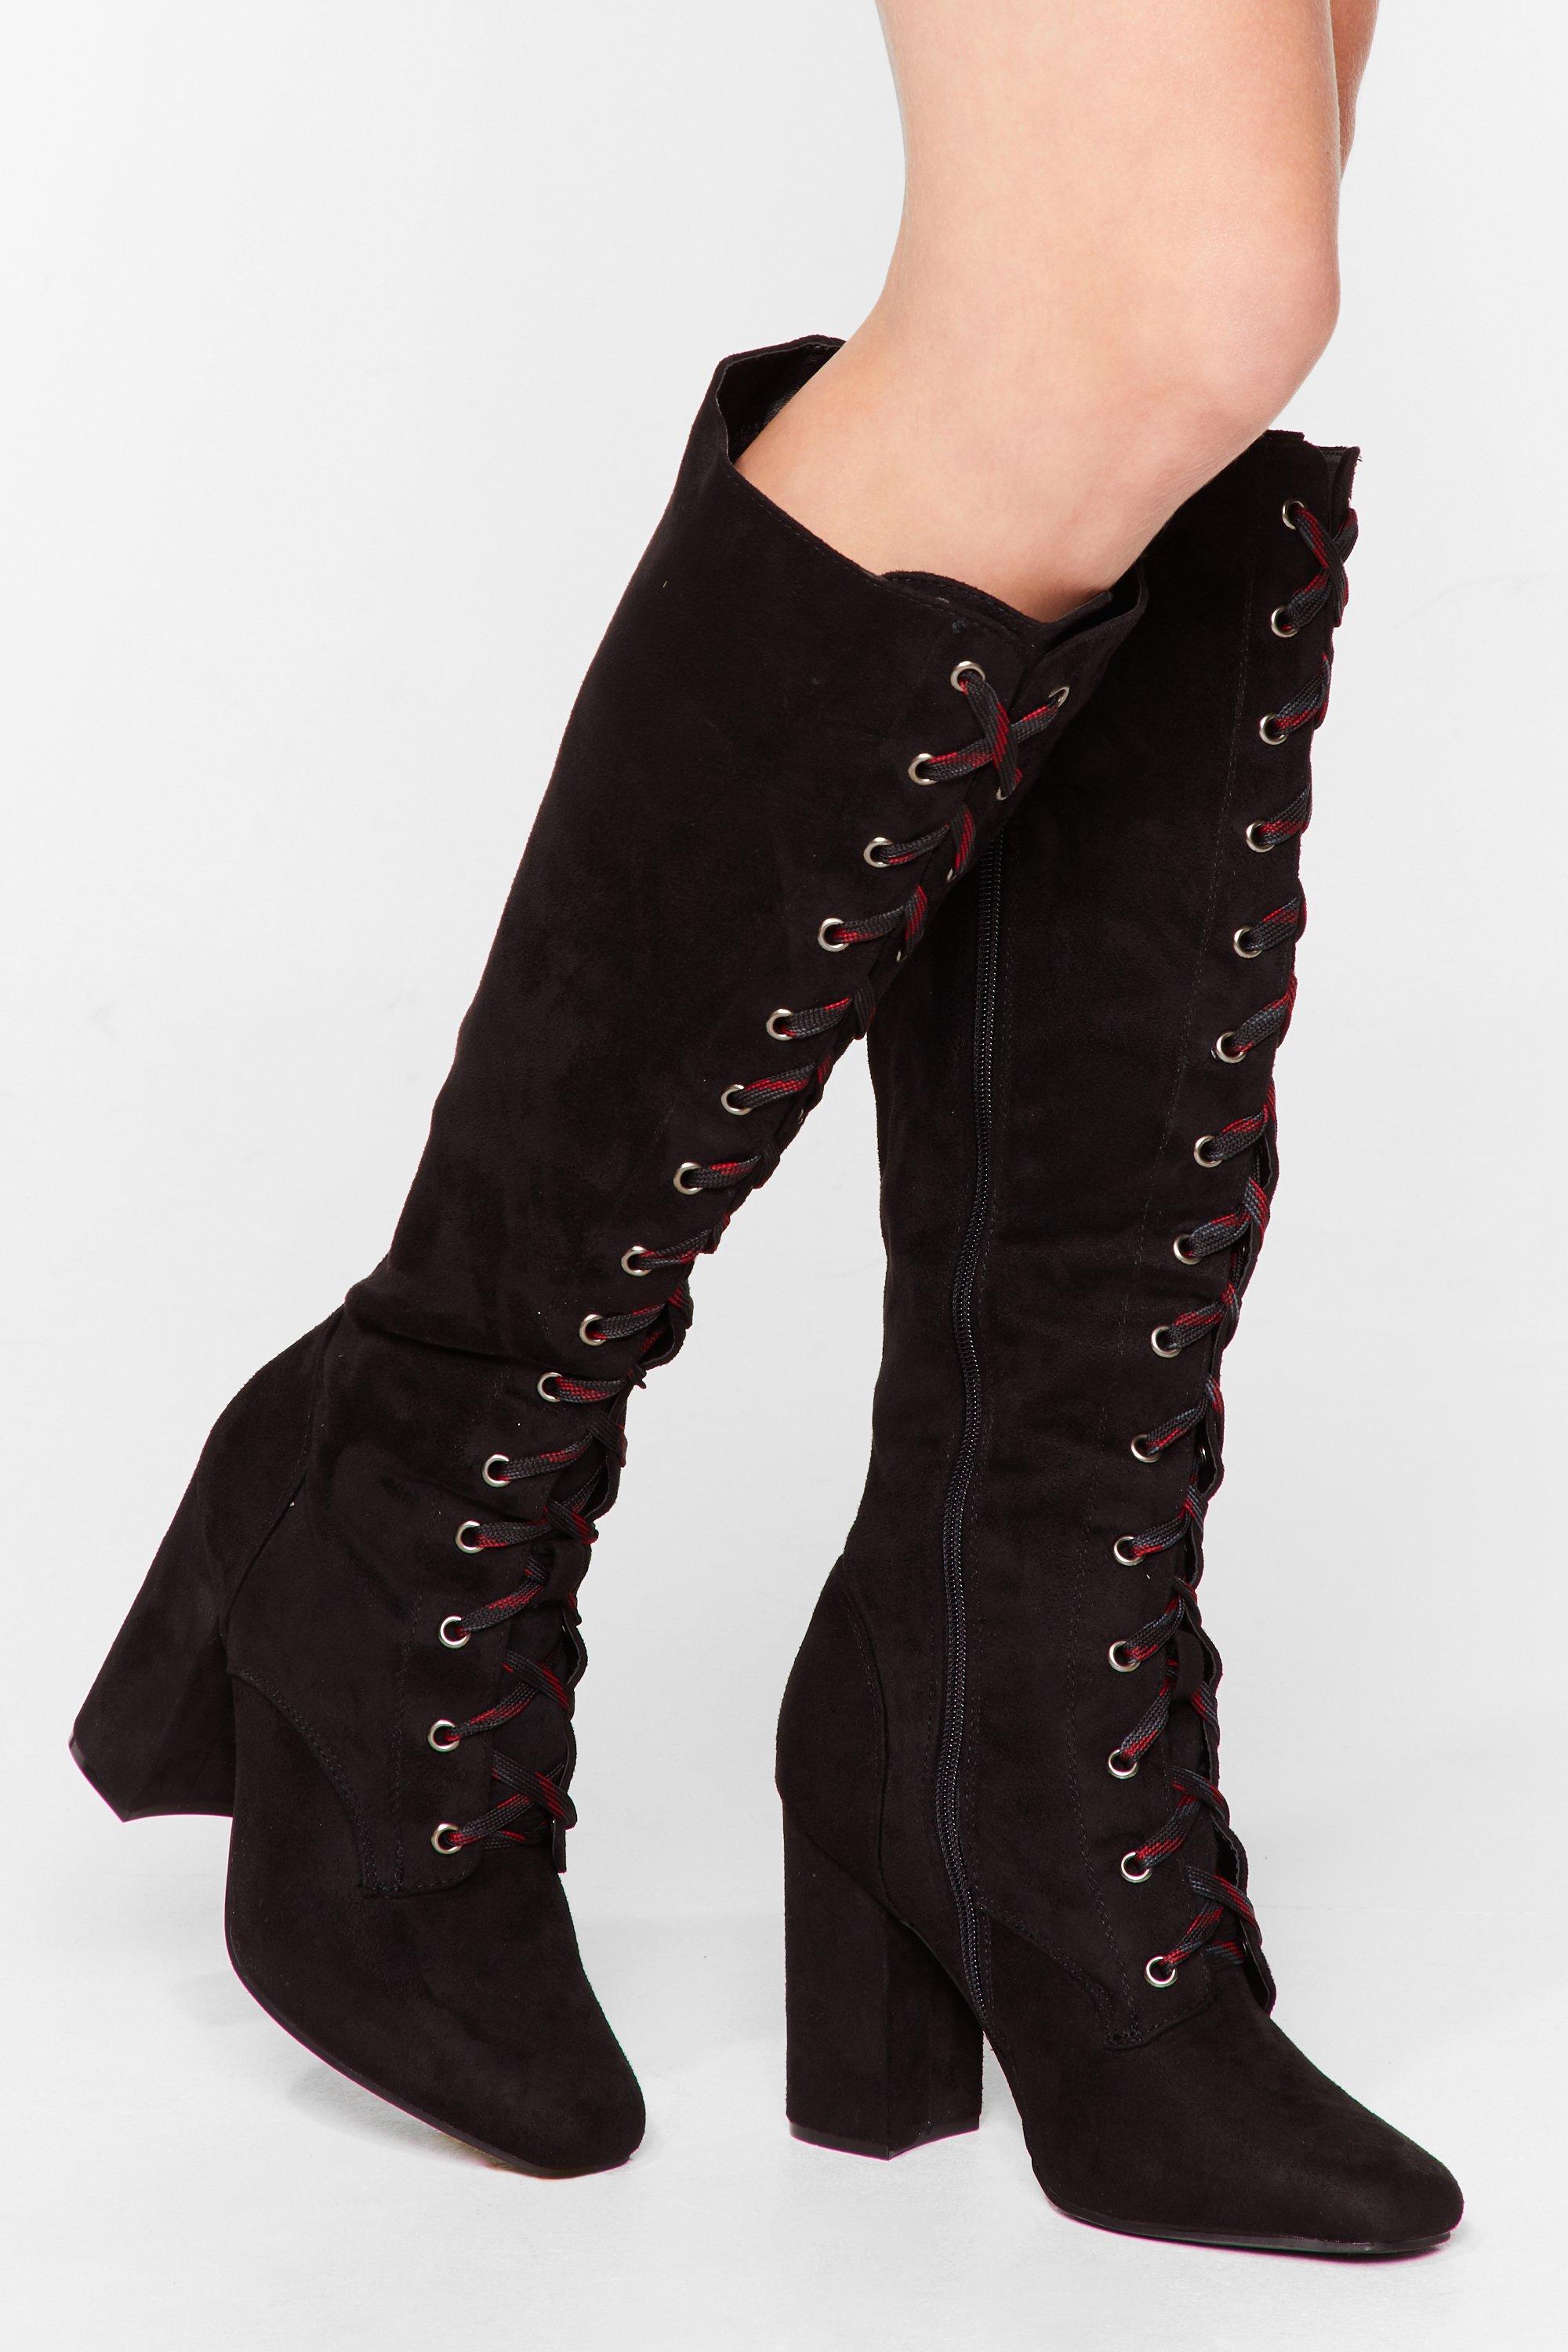 flat lace up knee high boots